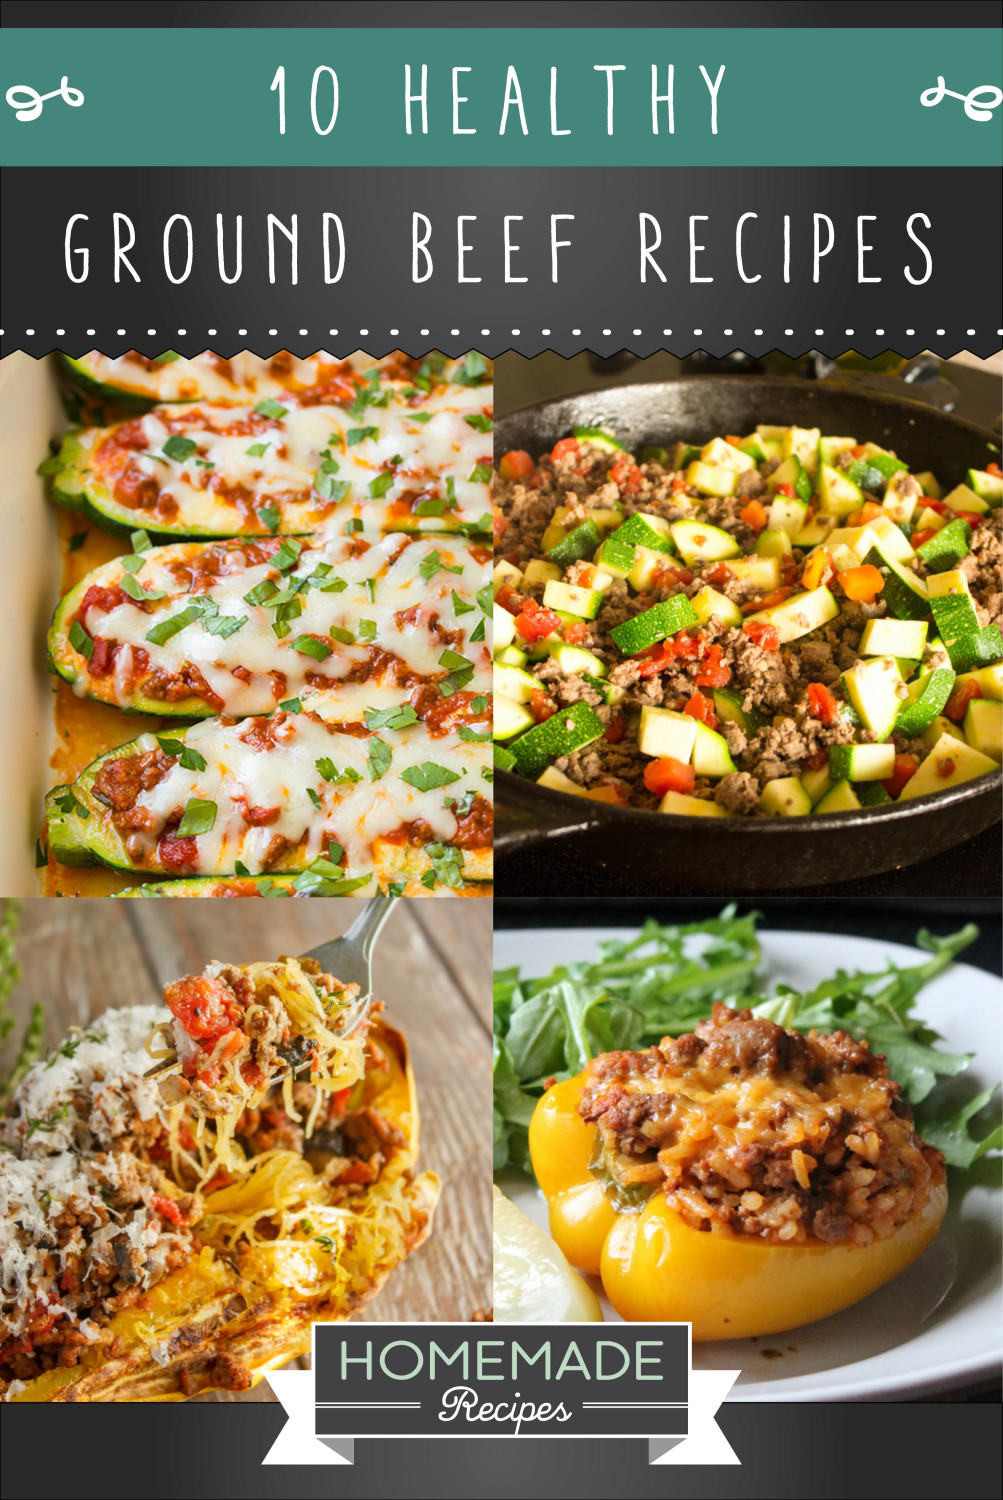 Healthy Recipes Using Ground Beef
 10 Healthy Ground Beef Recipes